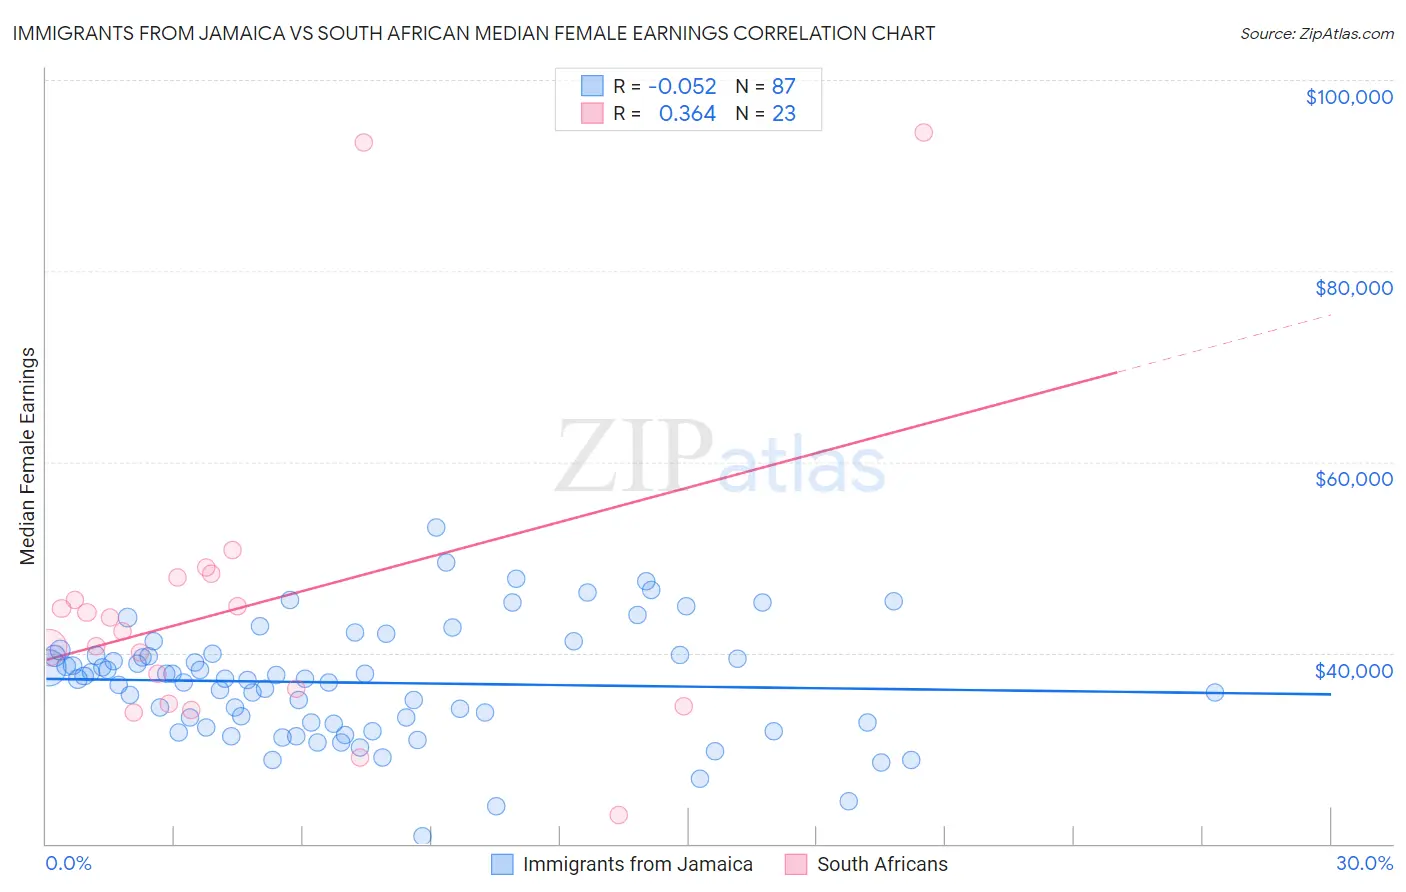 Immigrants from Jamaica vs South African Median Female Earnings